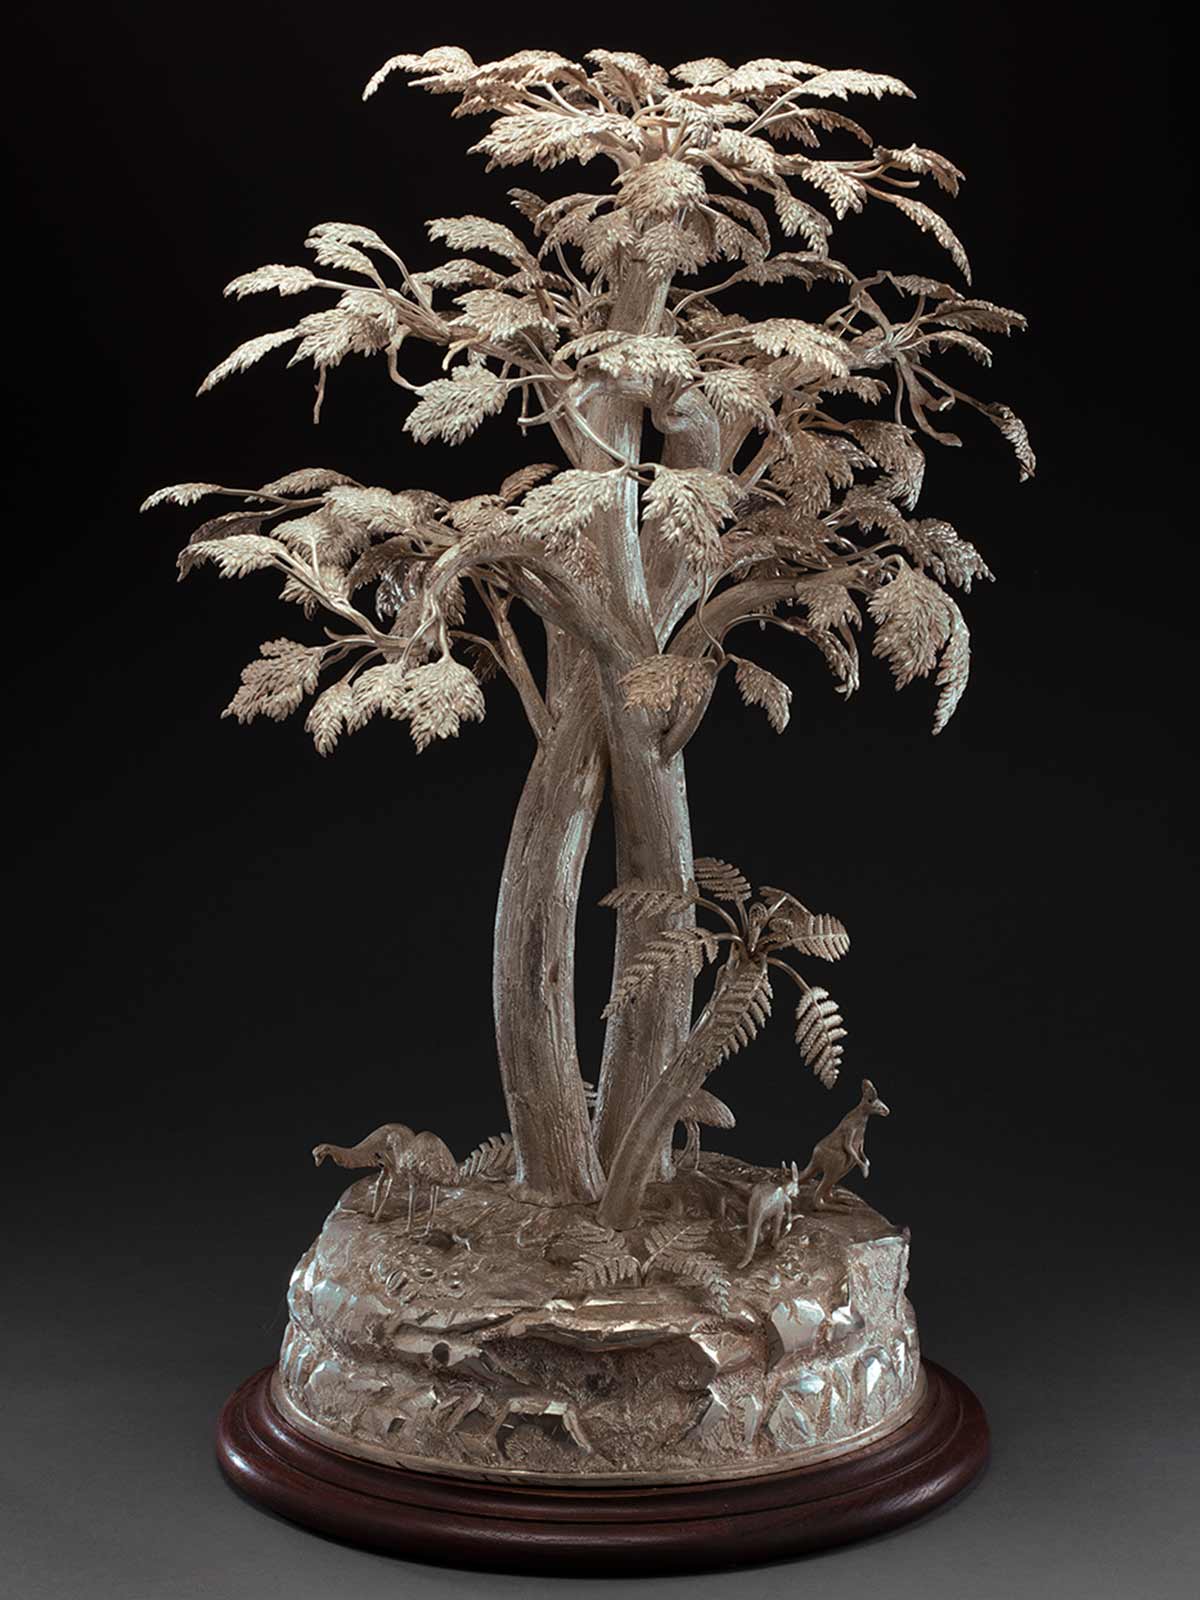 Silver tree with small silver kangaroos and emus on a round base. - click to view larger image